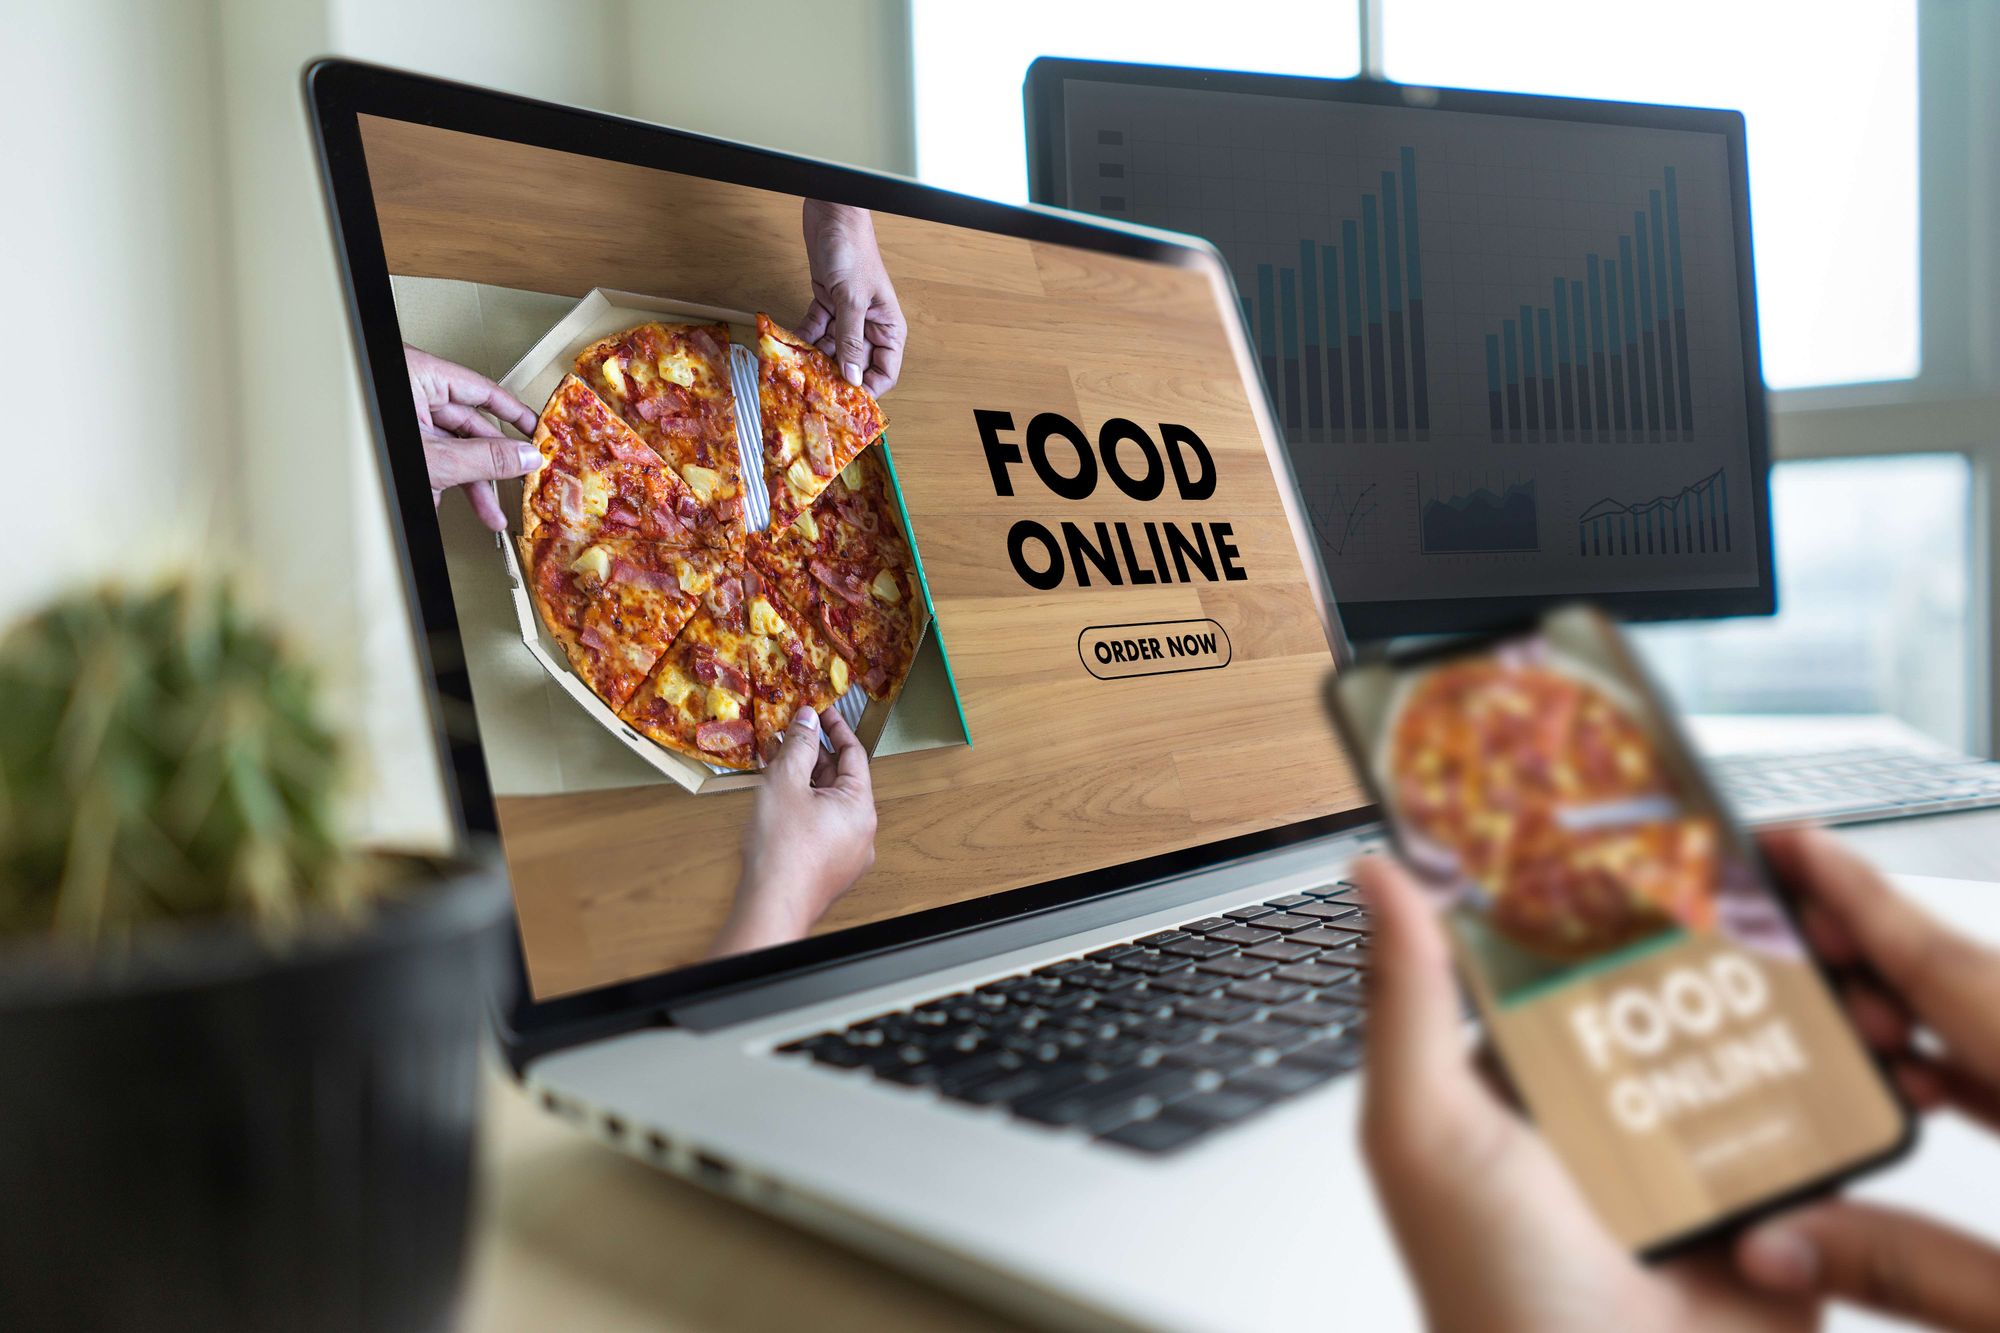 A hand holding a phone in front of a laptop with the words "Food Online" on the screens.